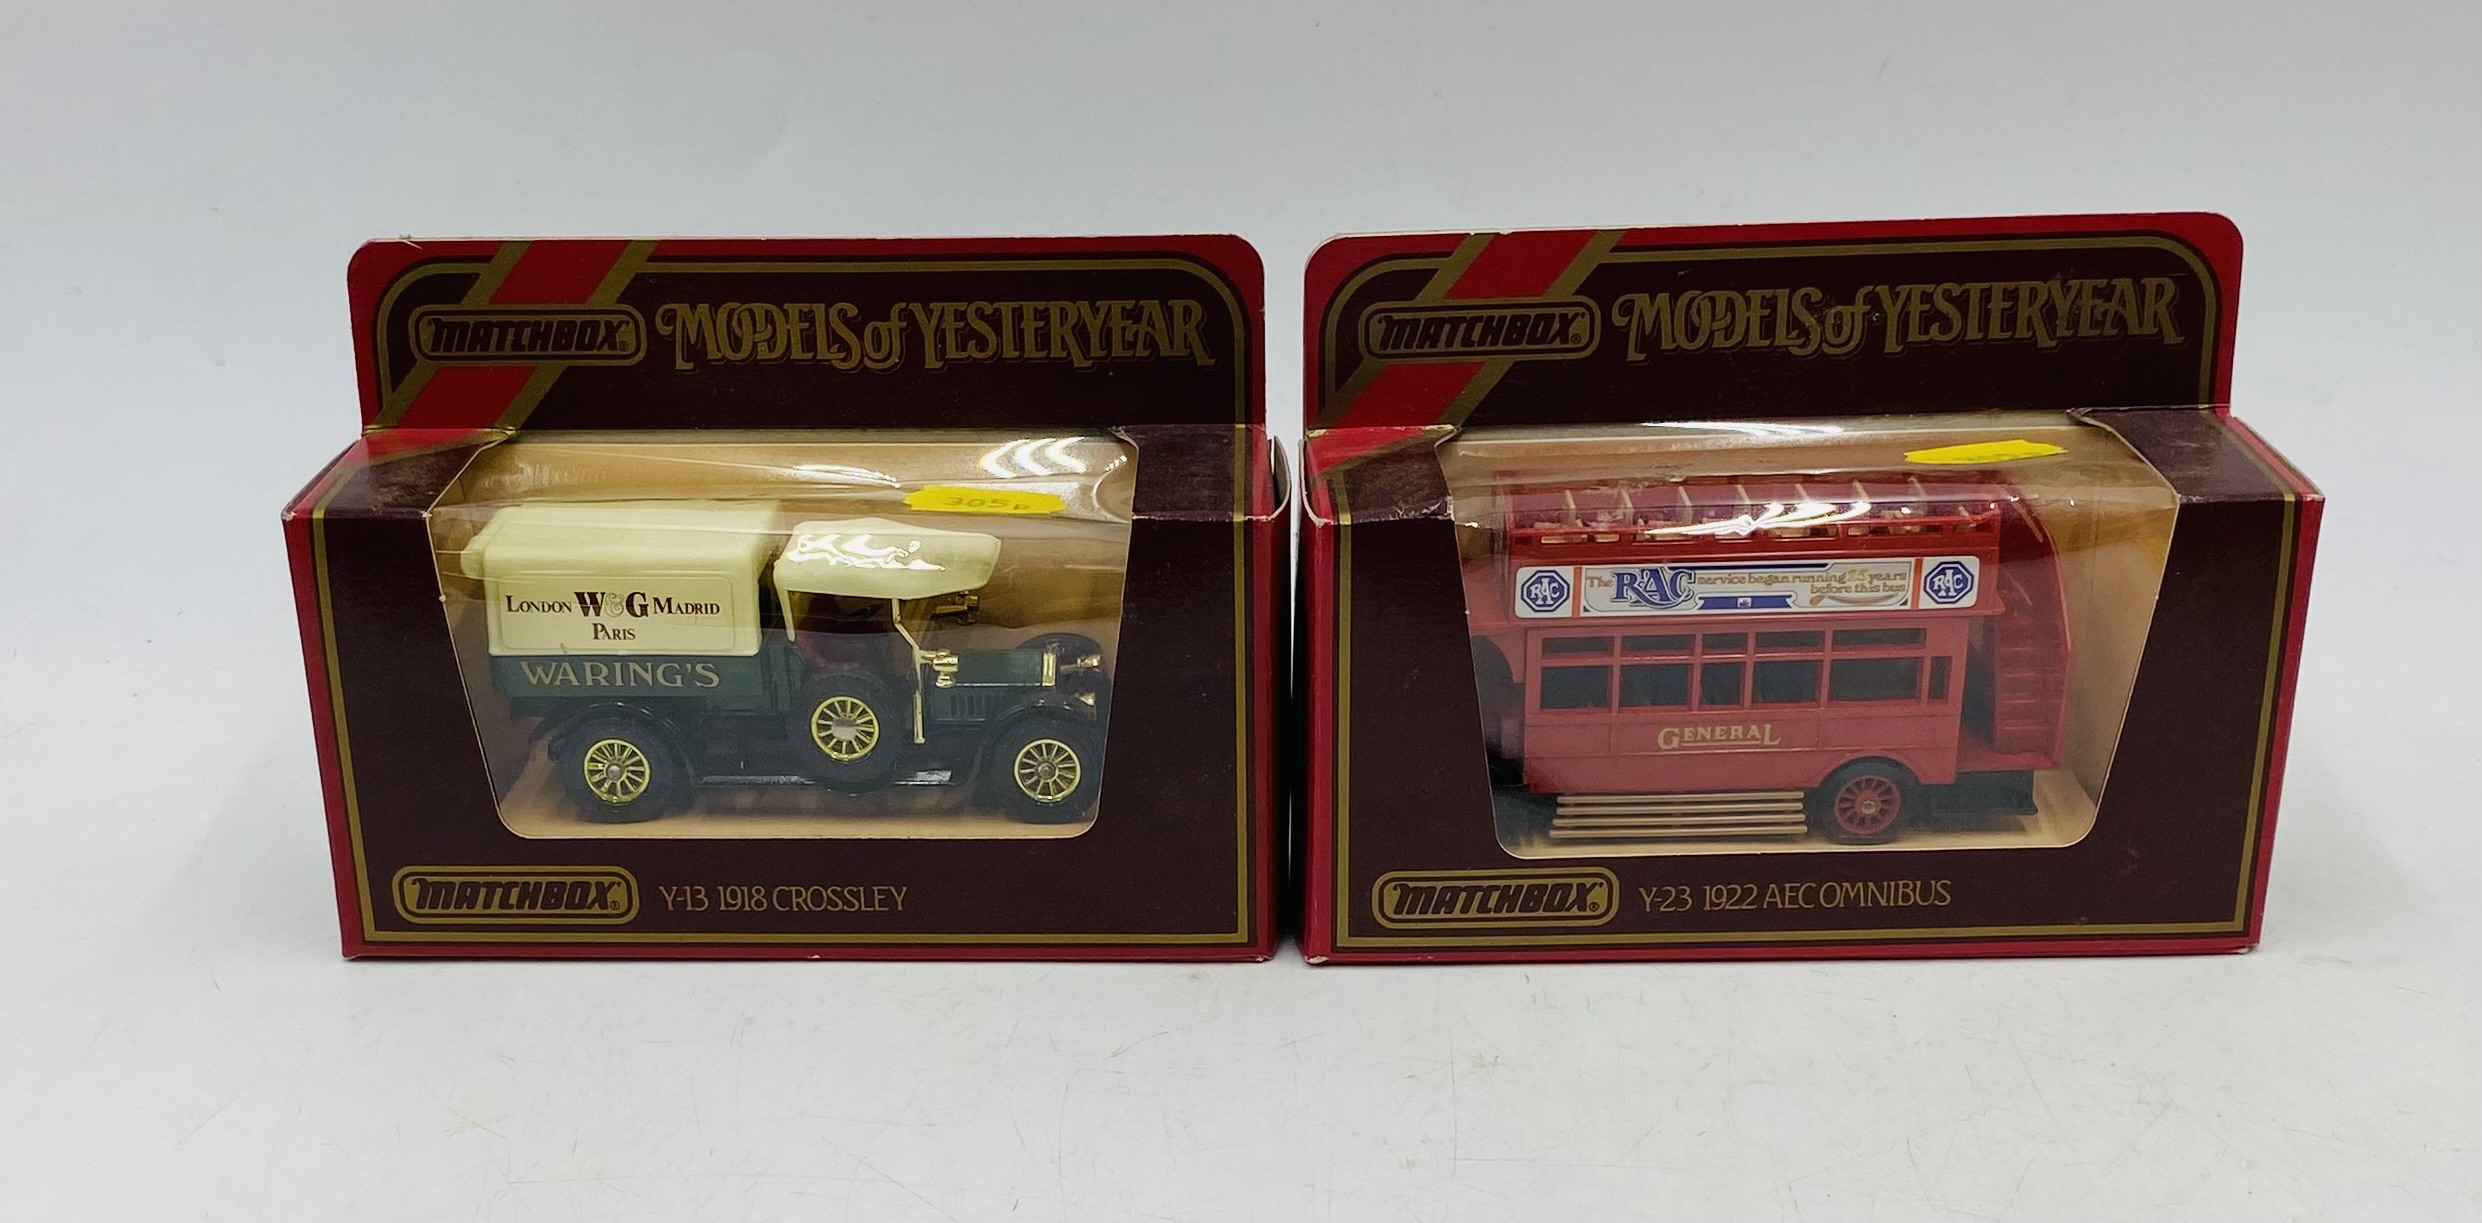 A collection of six boxed die-cast Vanguards Classic Popular Saloon Cars including a Rover P4, - Image 4 of 5